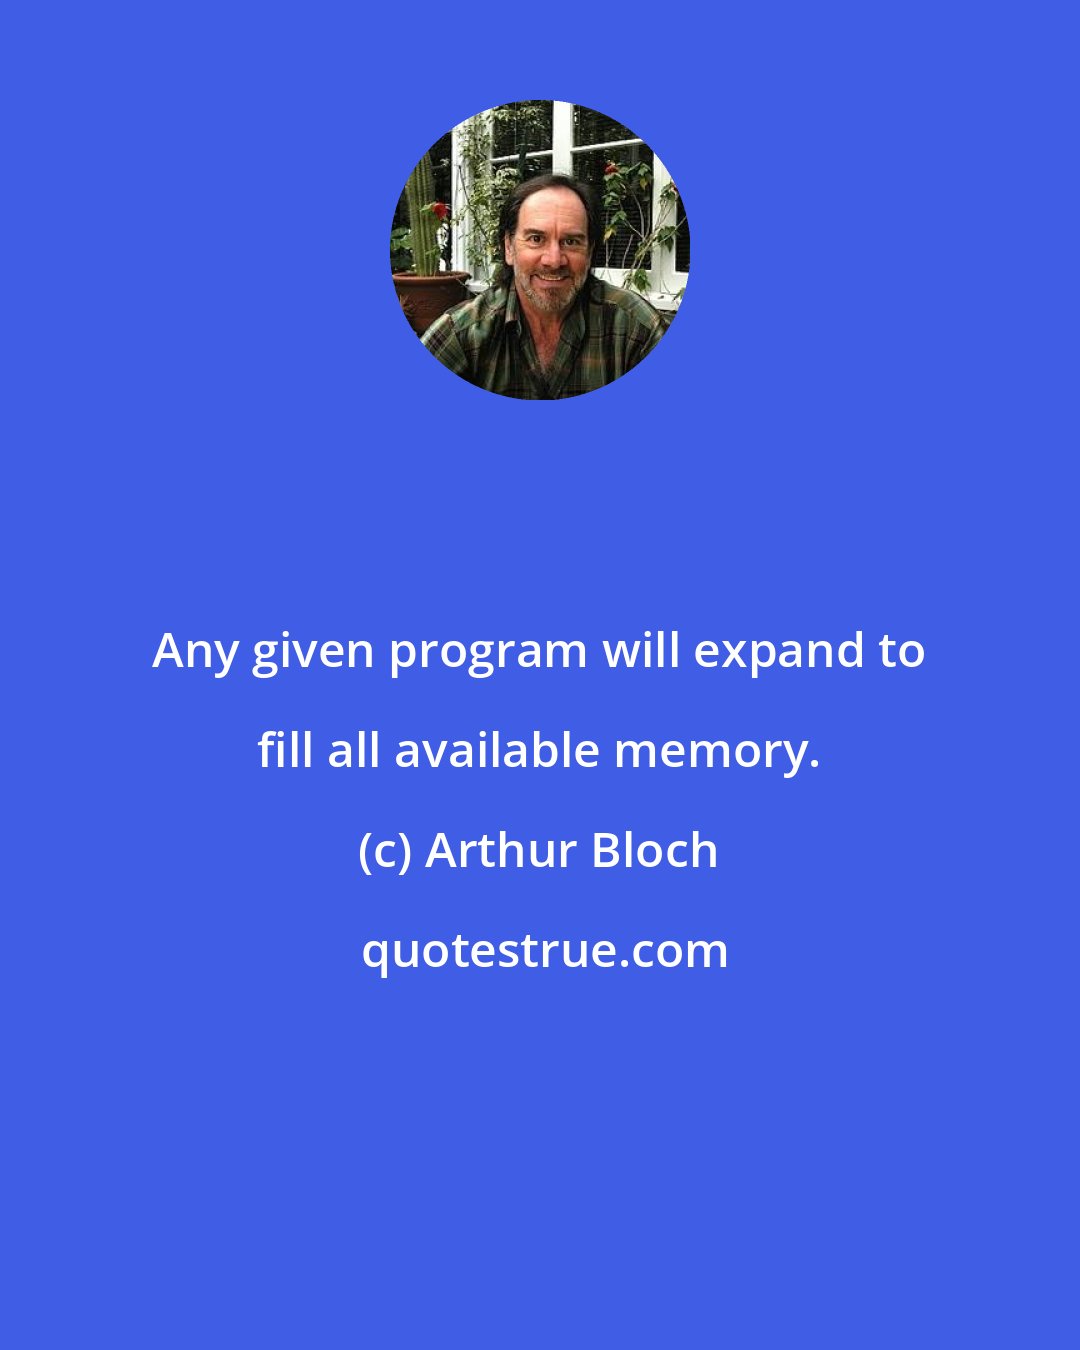 Arthur Bloch: Any given program will expand to fill all available memory.